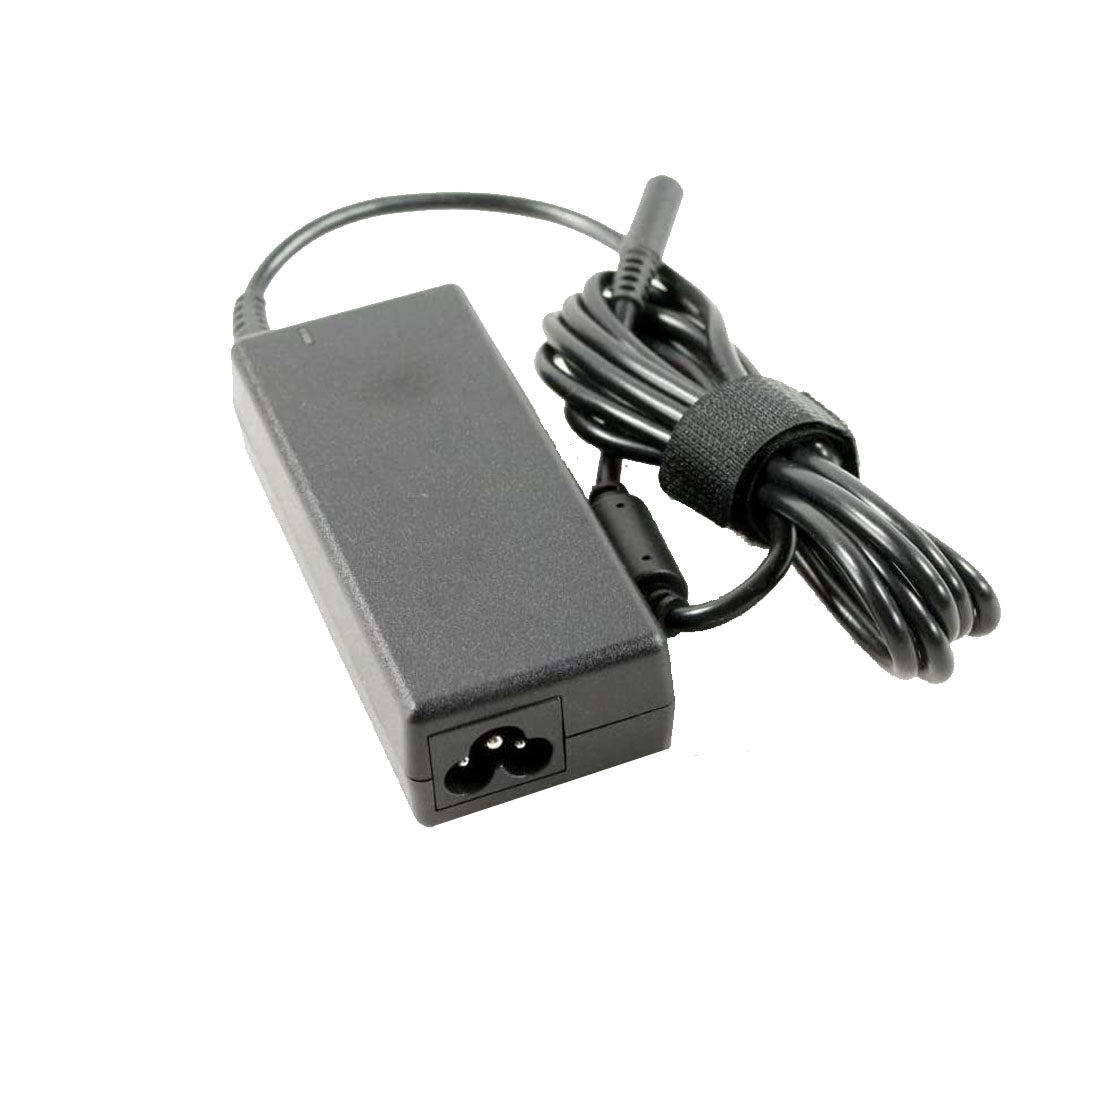 Dell Original 65W 19.5V 4.5mm Pin Laptop Charger Adapter for Inspiron 14 3458 With Power Cord